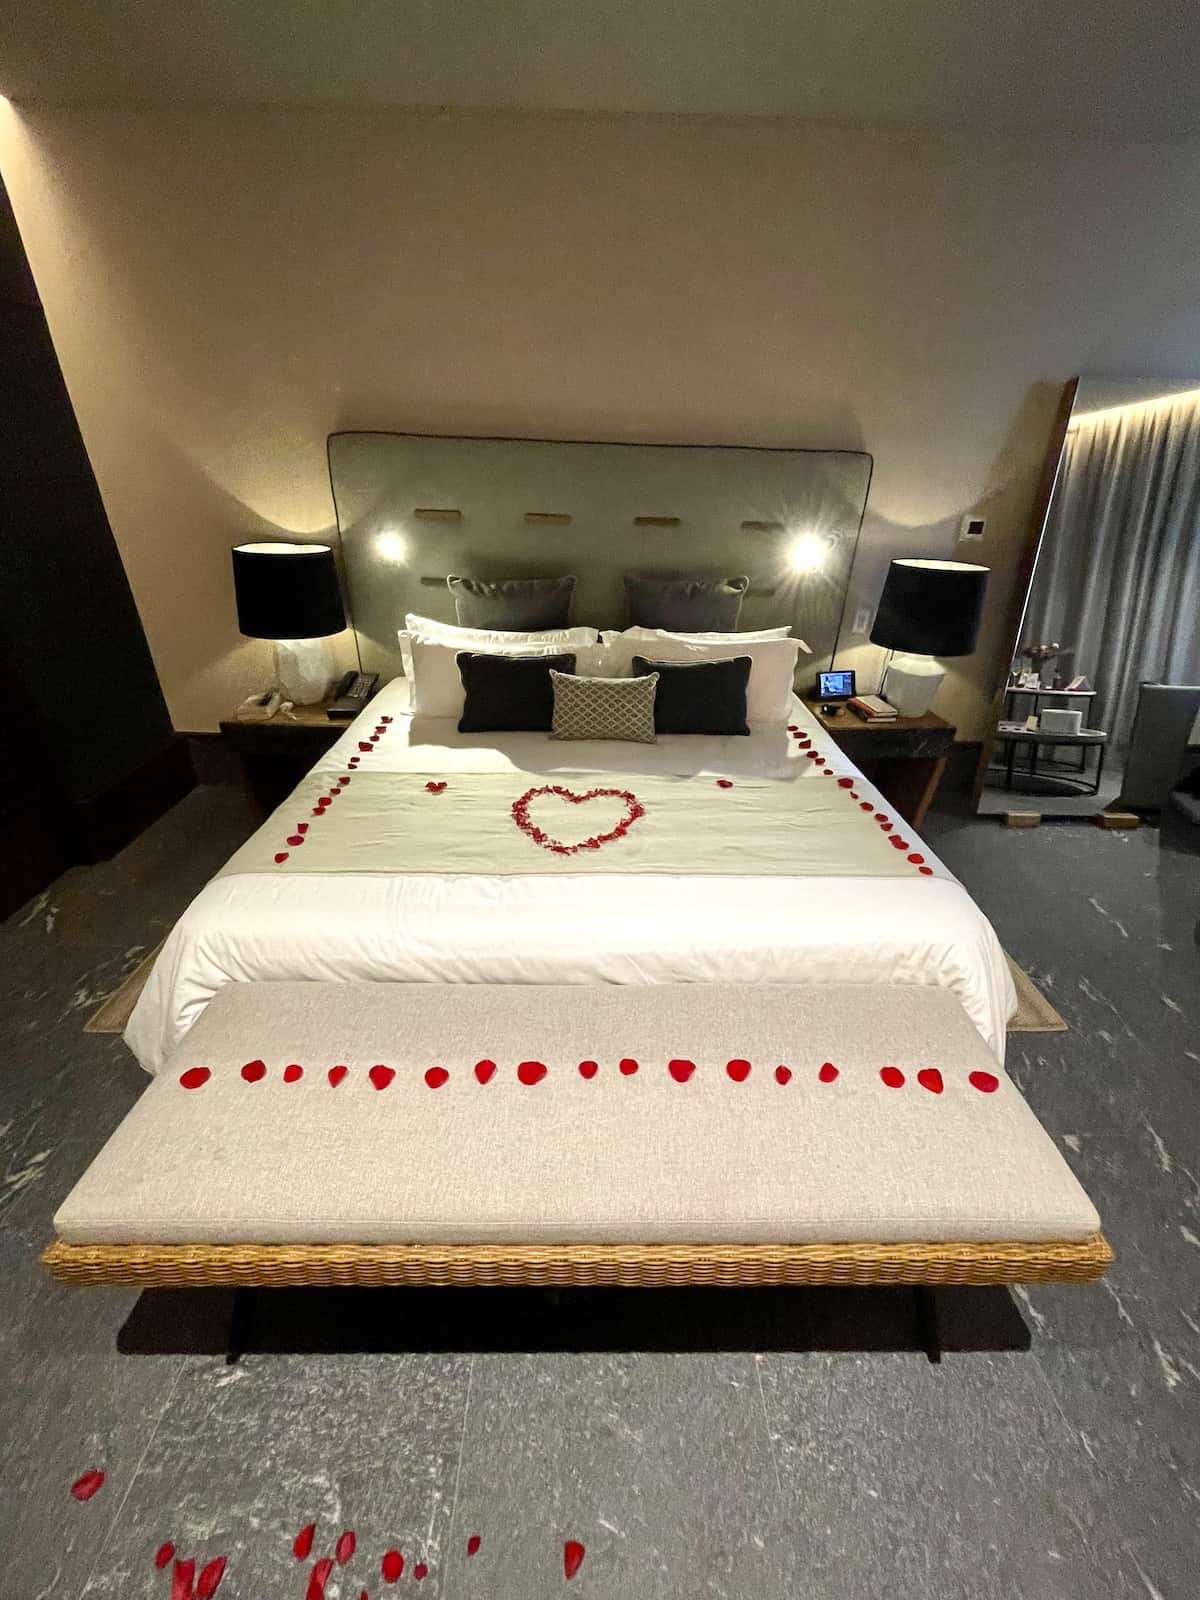 Bed with rose petals in a heart design.